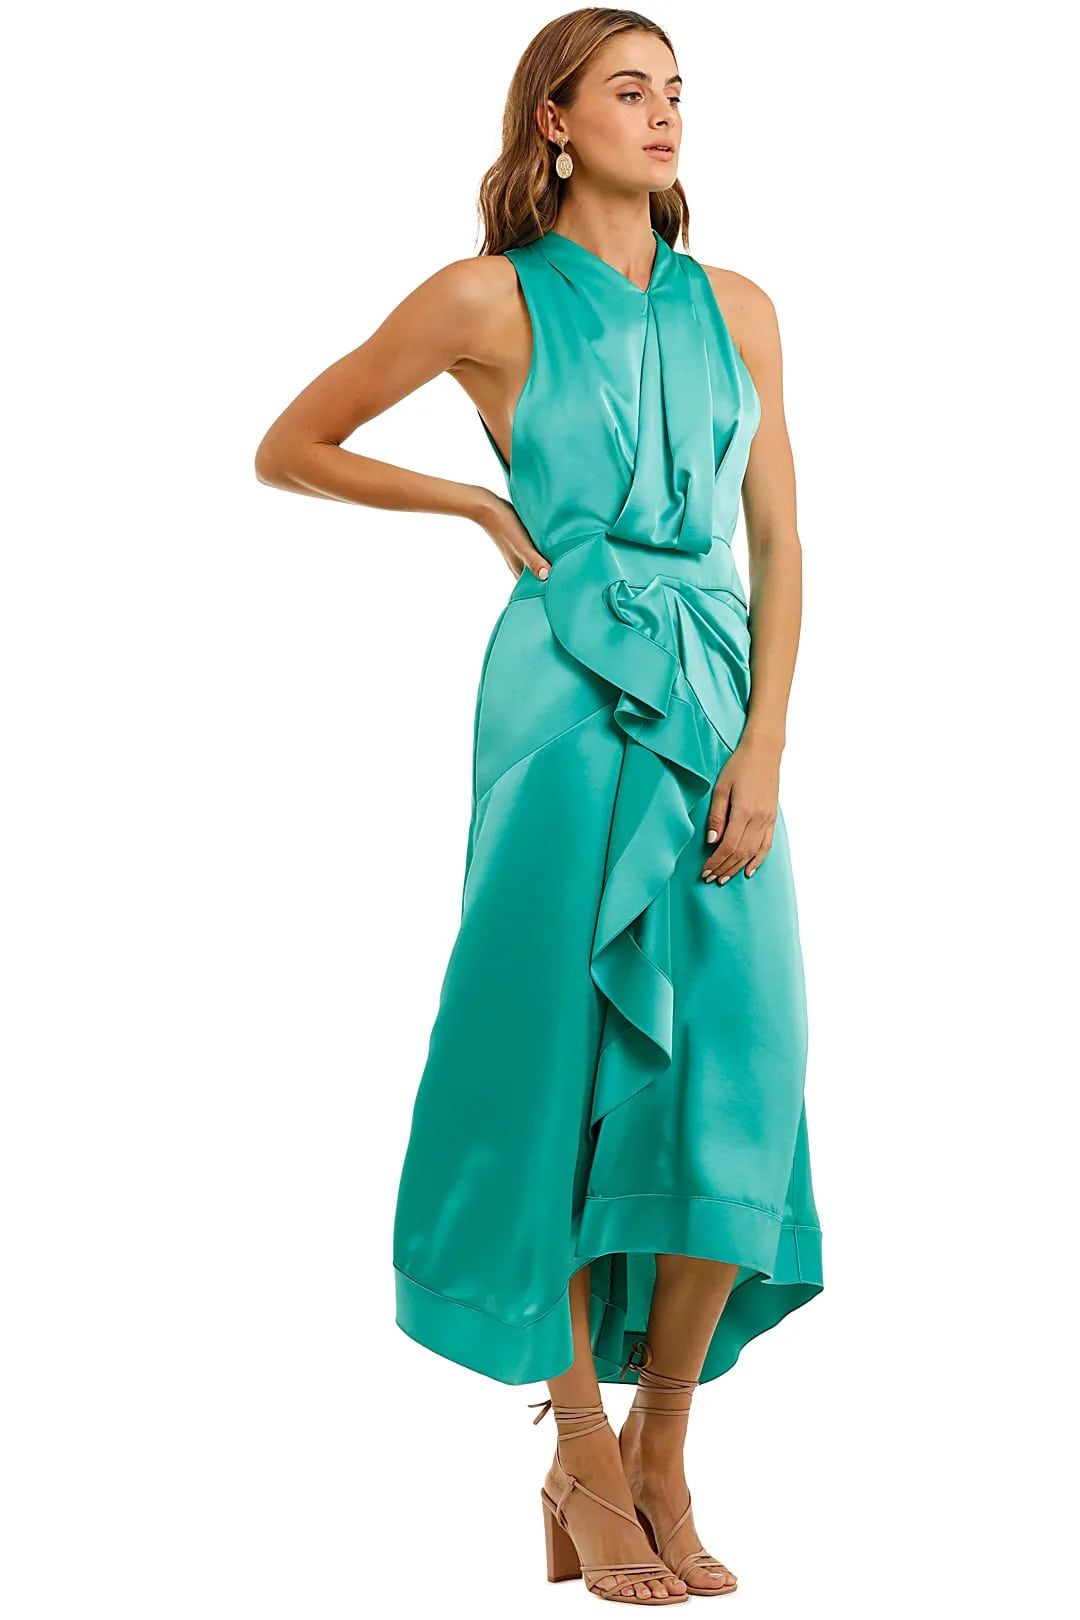 Rent Millbank dress in green for formal events.